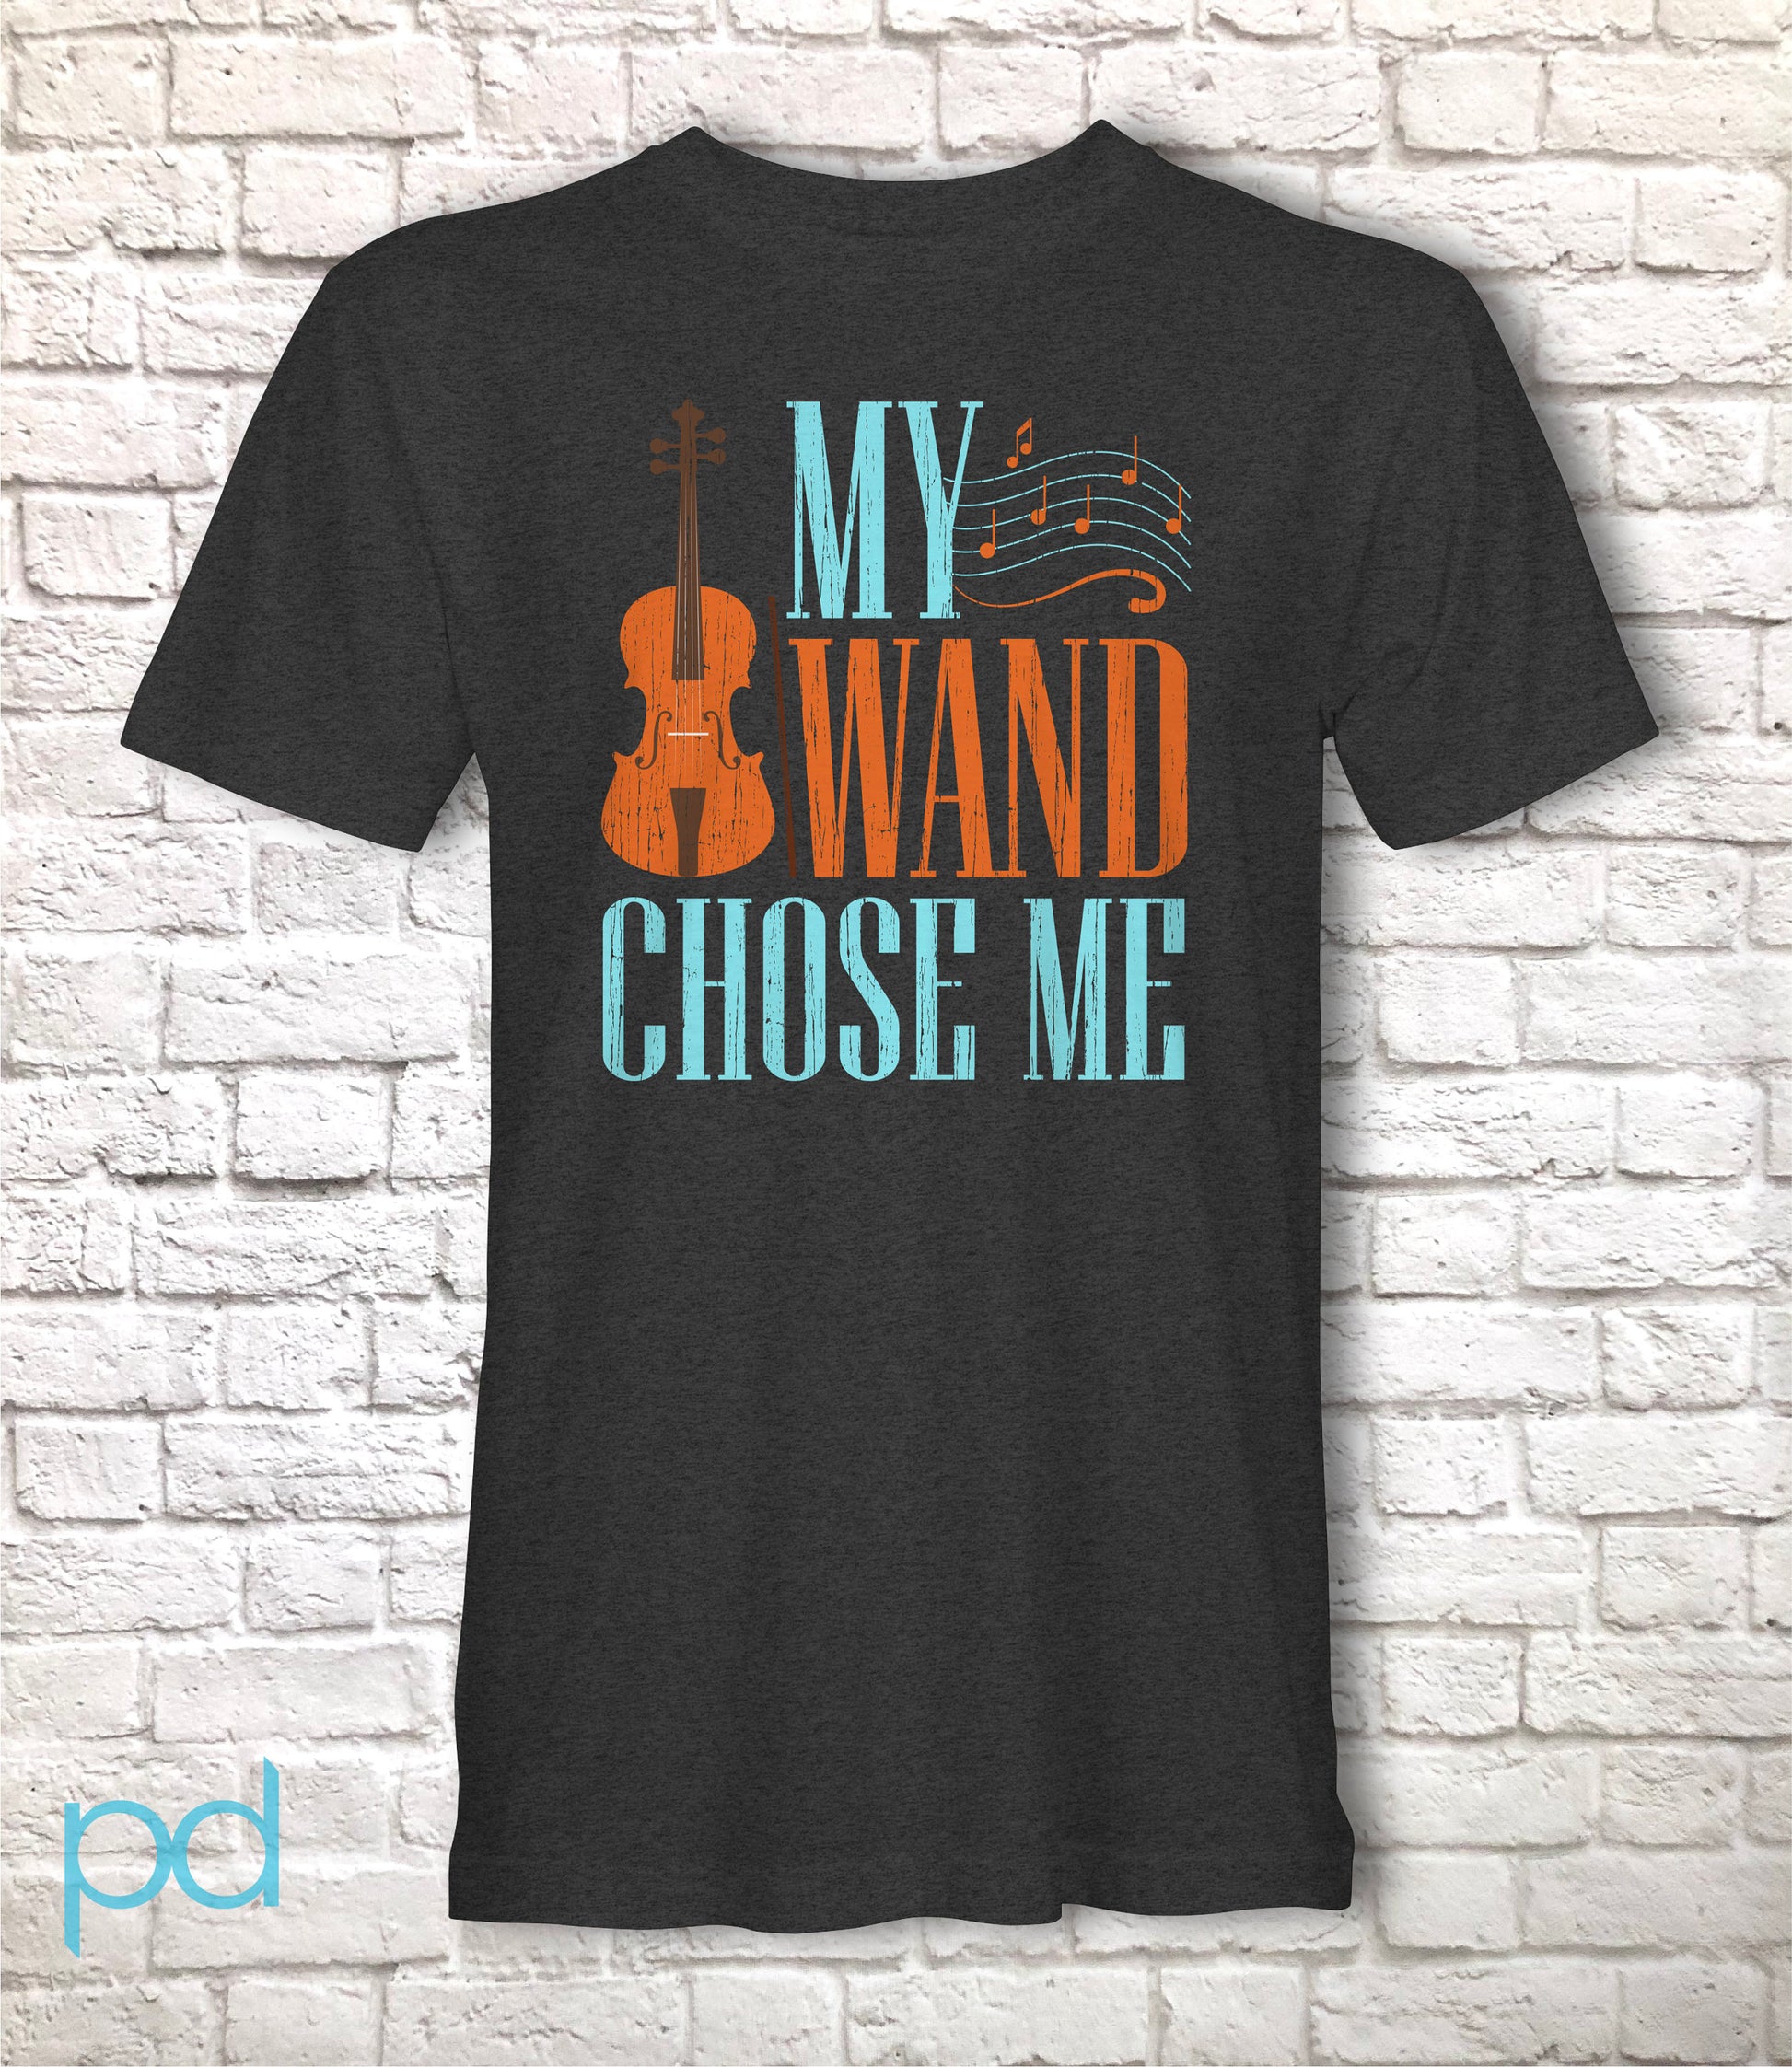 Funny Violin T-Shirt, Violinist Fiddle Player Gift Idea Tee Shirt Top - My Wand Chose Me